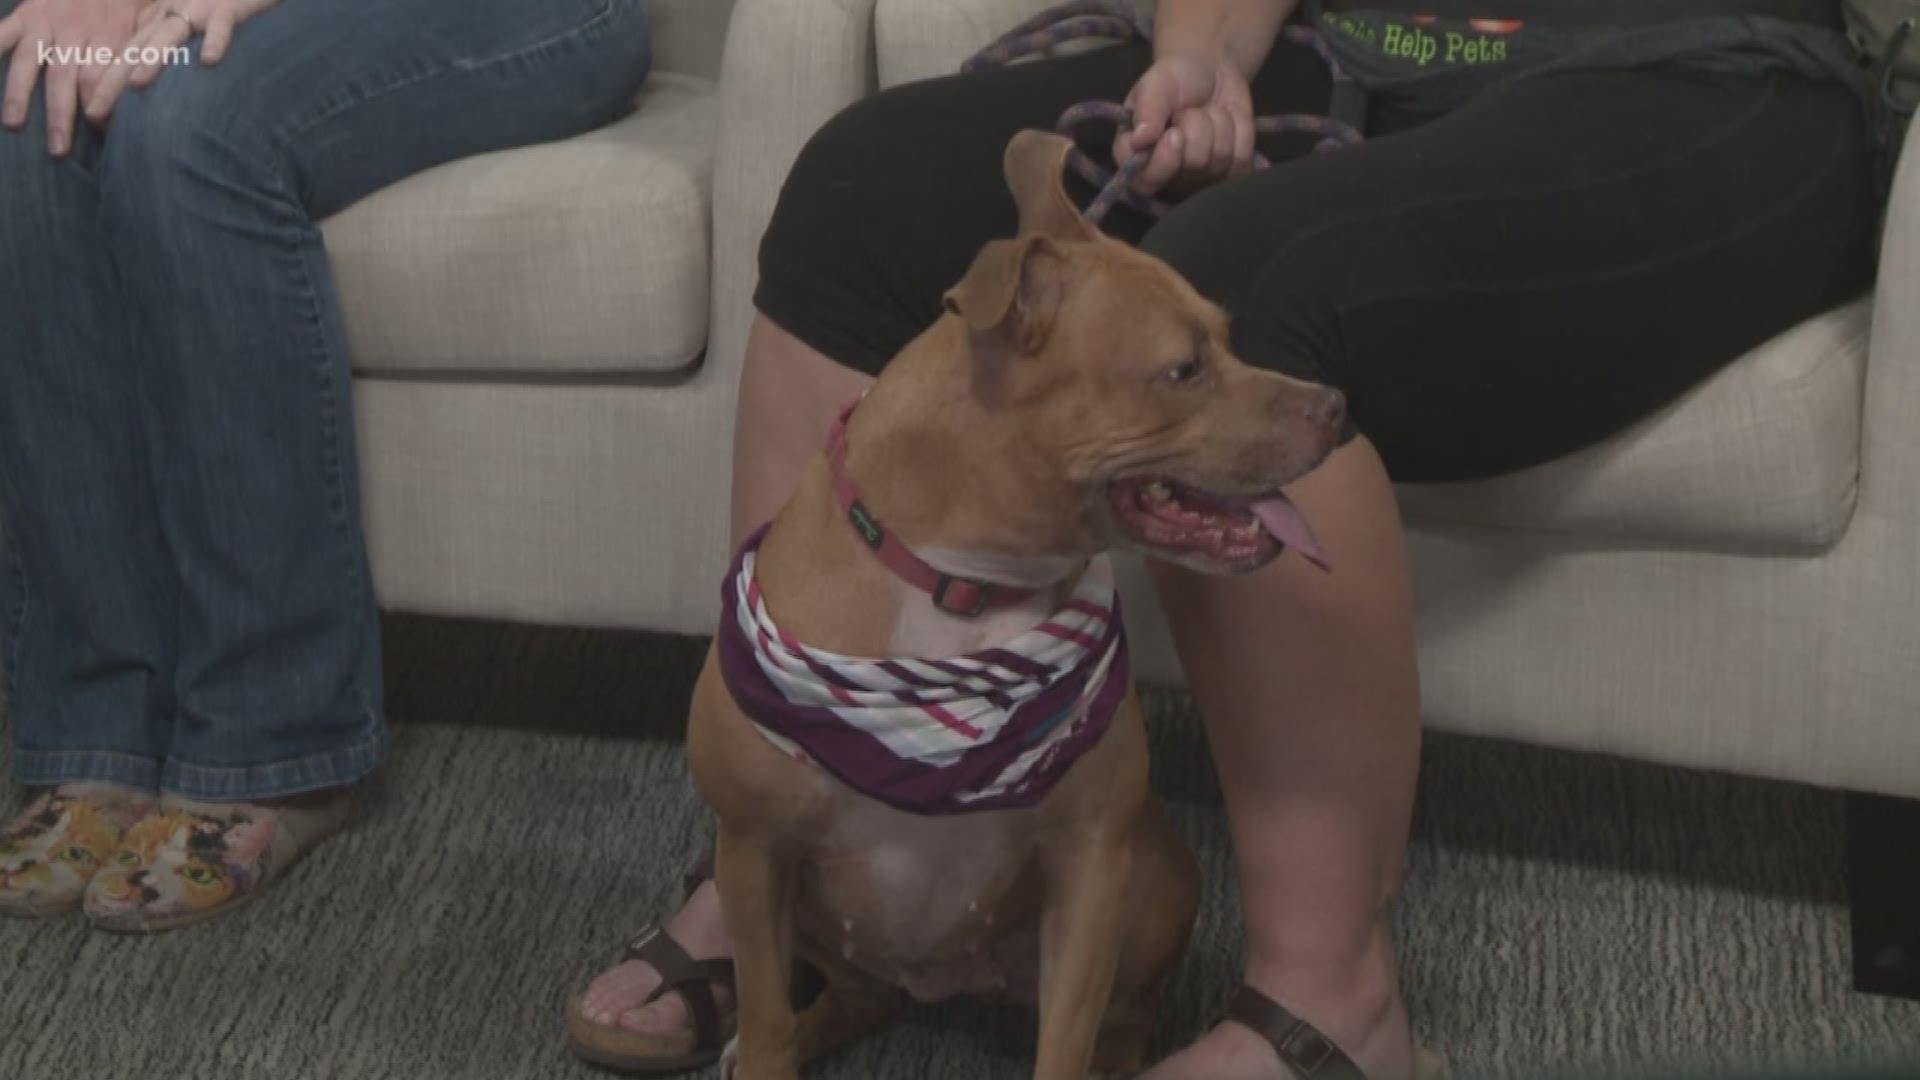 Joining us this morning is Hannah Horstman with Austin Pets Alive and she's brought along Celina today.